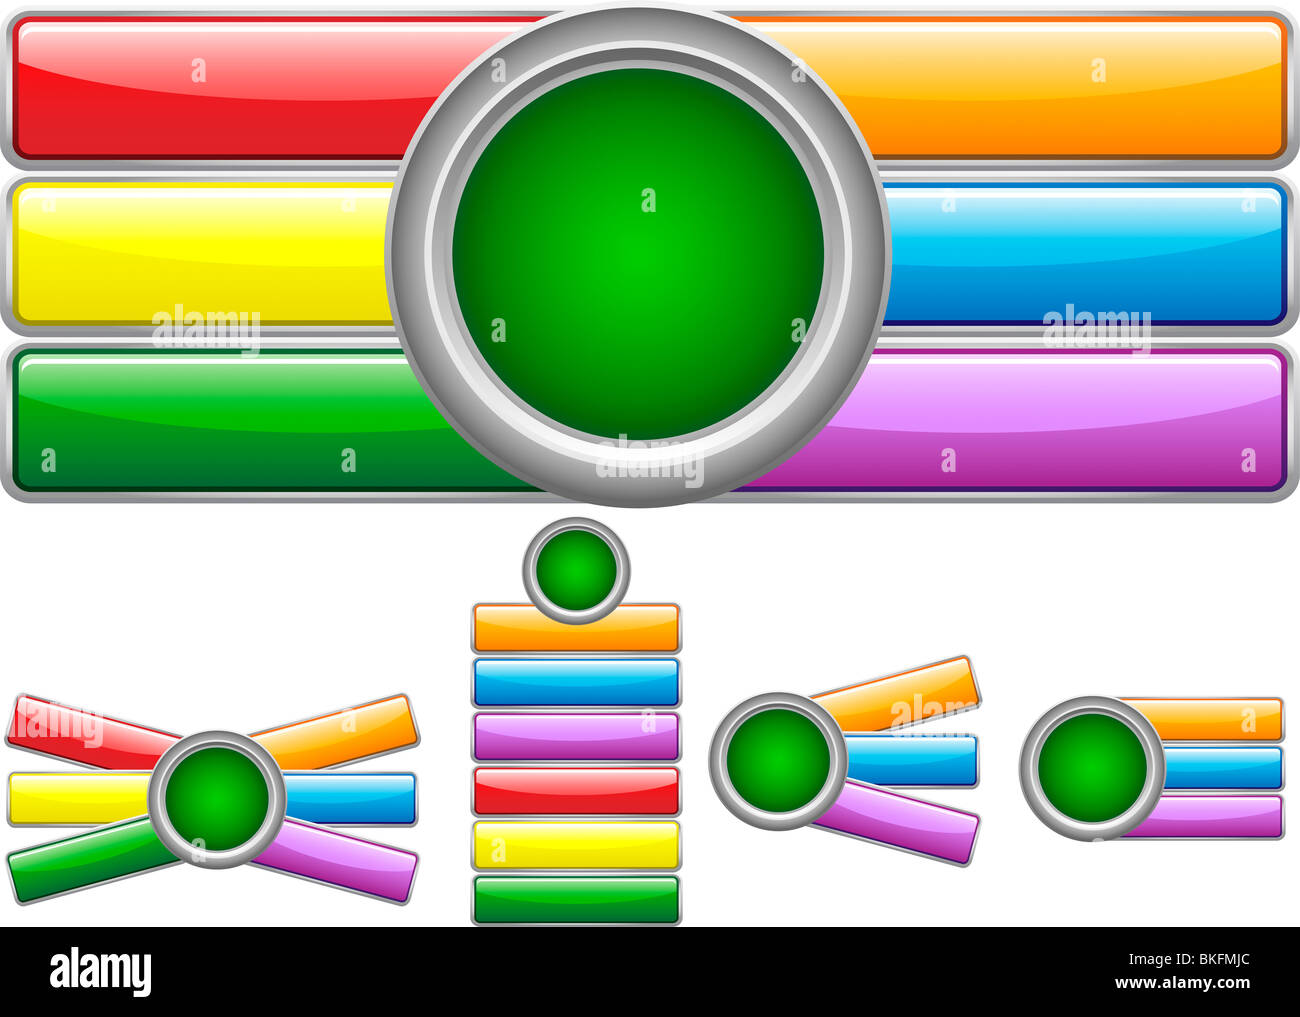 Glossy web buttons with colored bars Stock Photo